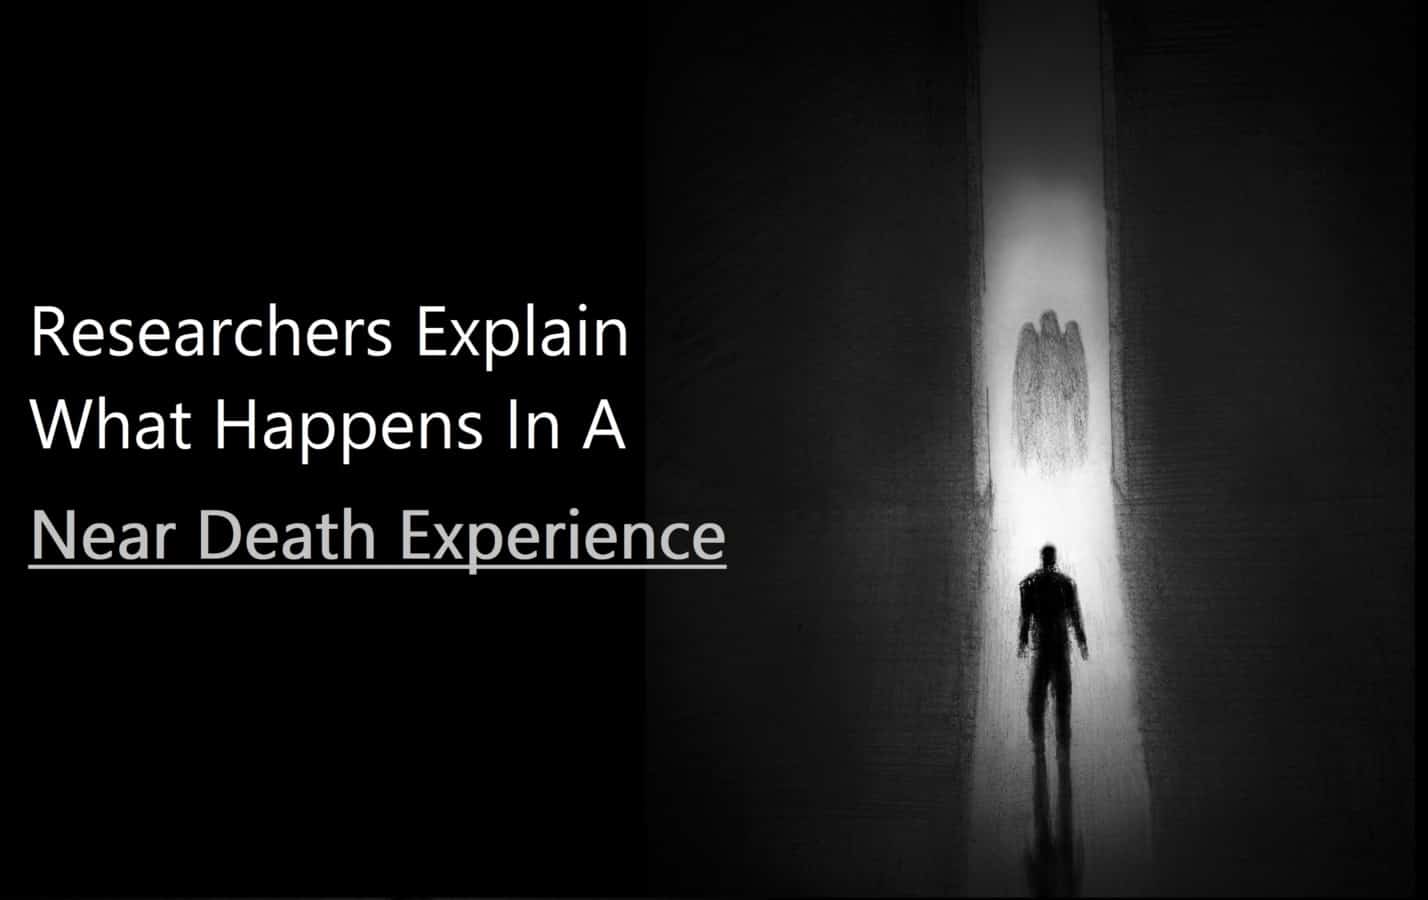 Researchers Explain What Happens In A Near Death Experience